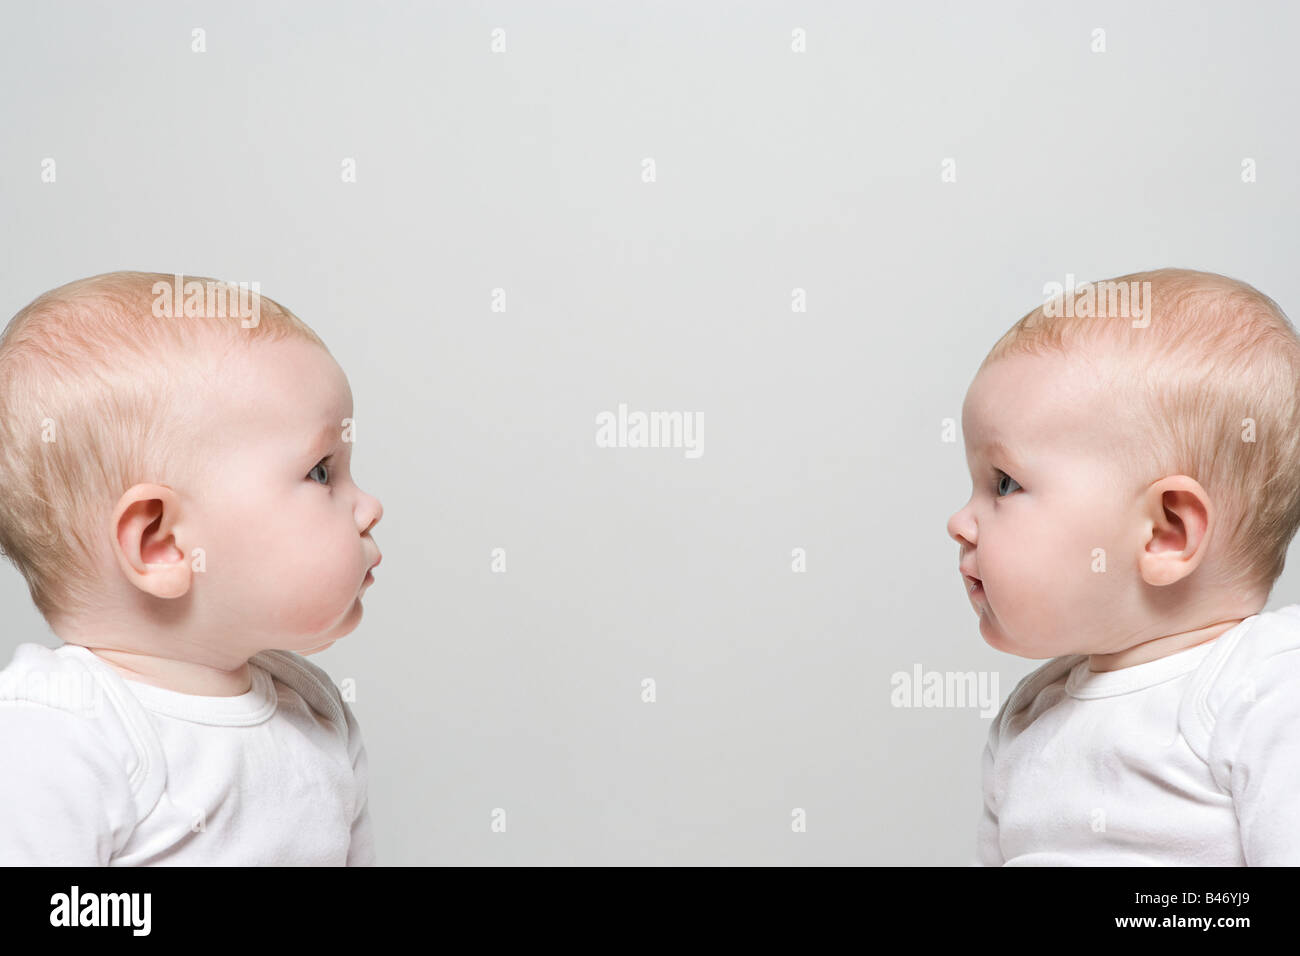 Babies face to face Stock Photo